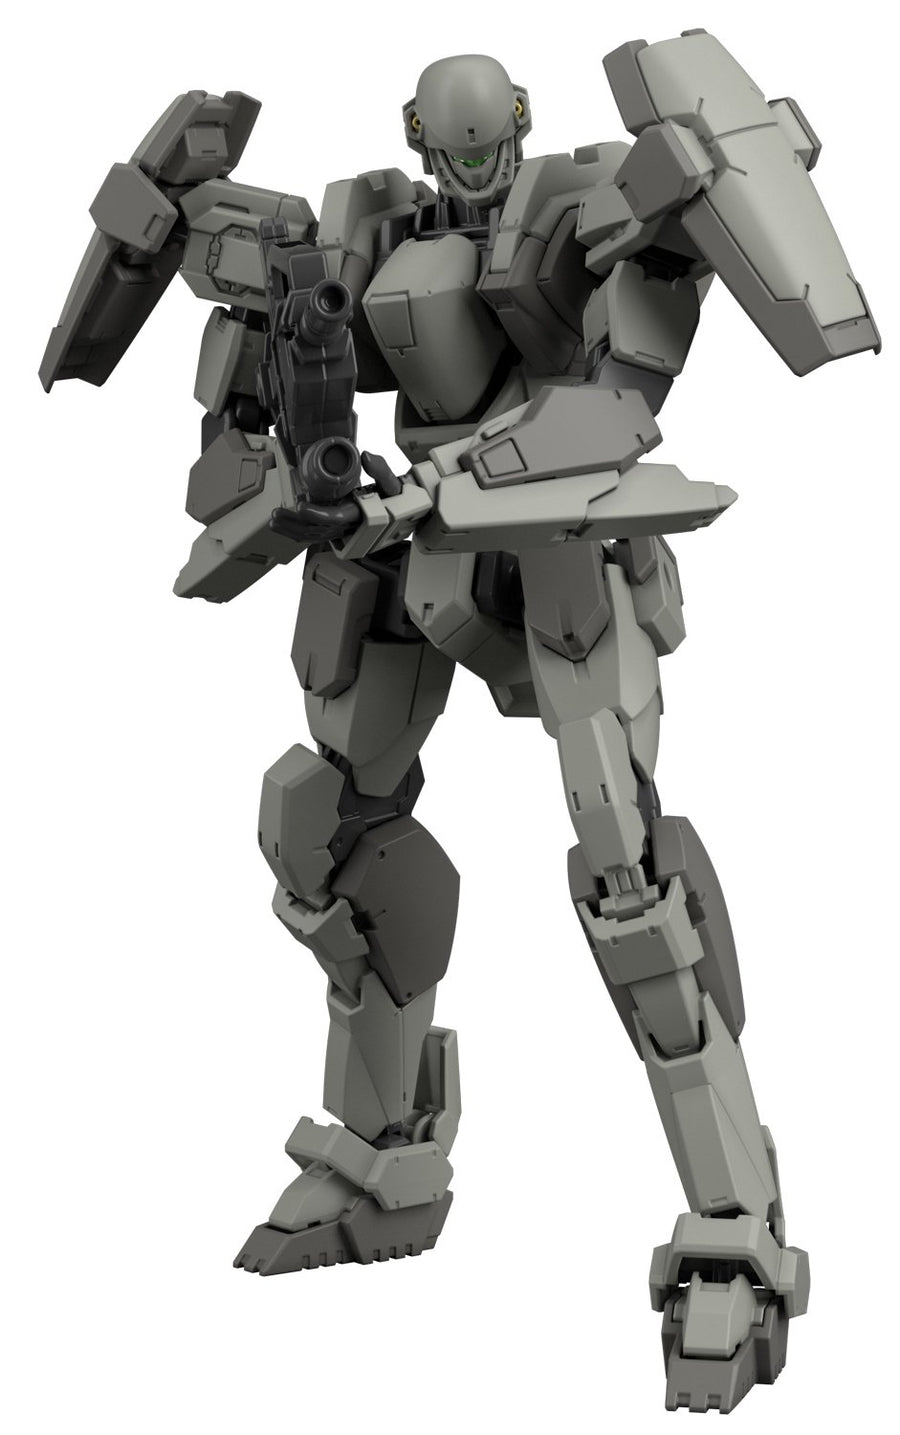 M9 Gernsback - Full Metal Panic! Invisible Victory